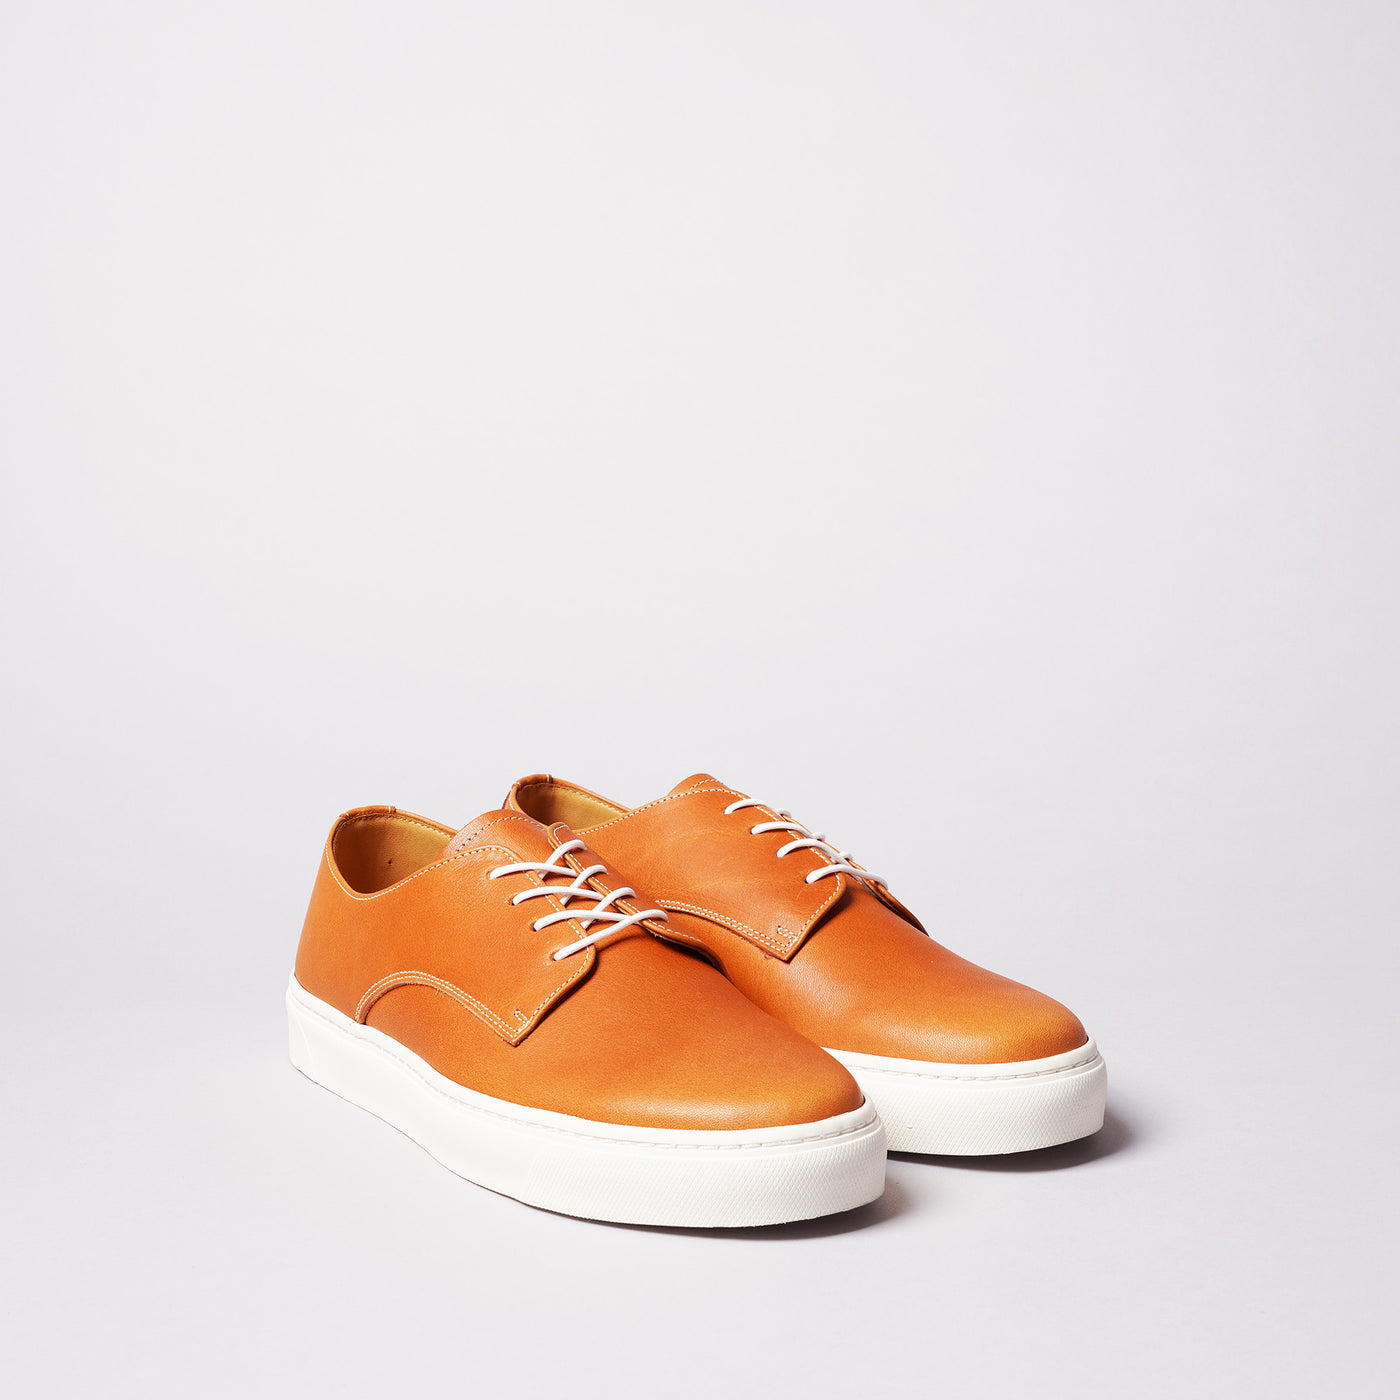 <TOSS> Bath Bath Lace-up Leather Sneaker Tochigi Tanned Leather / natural